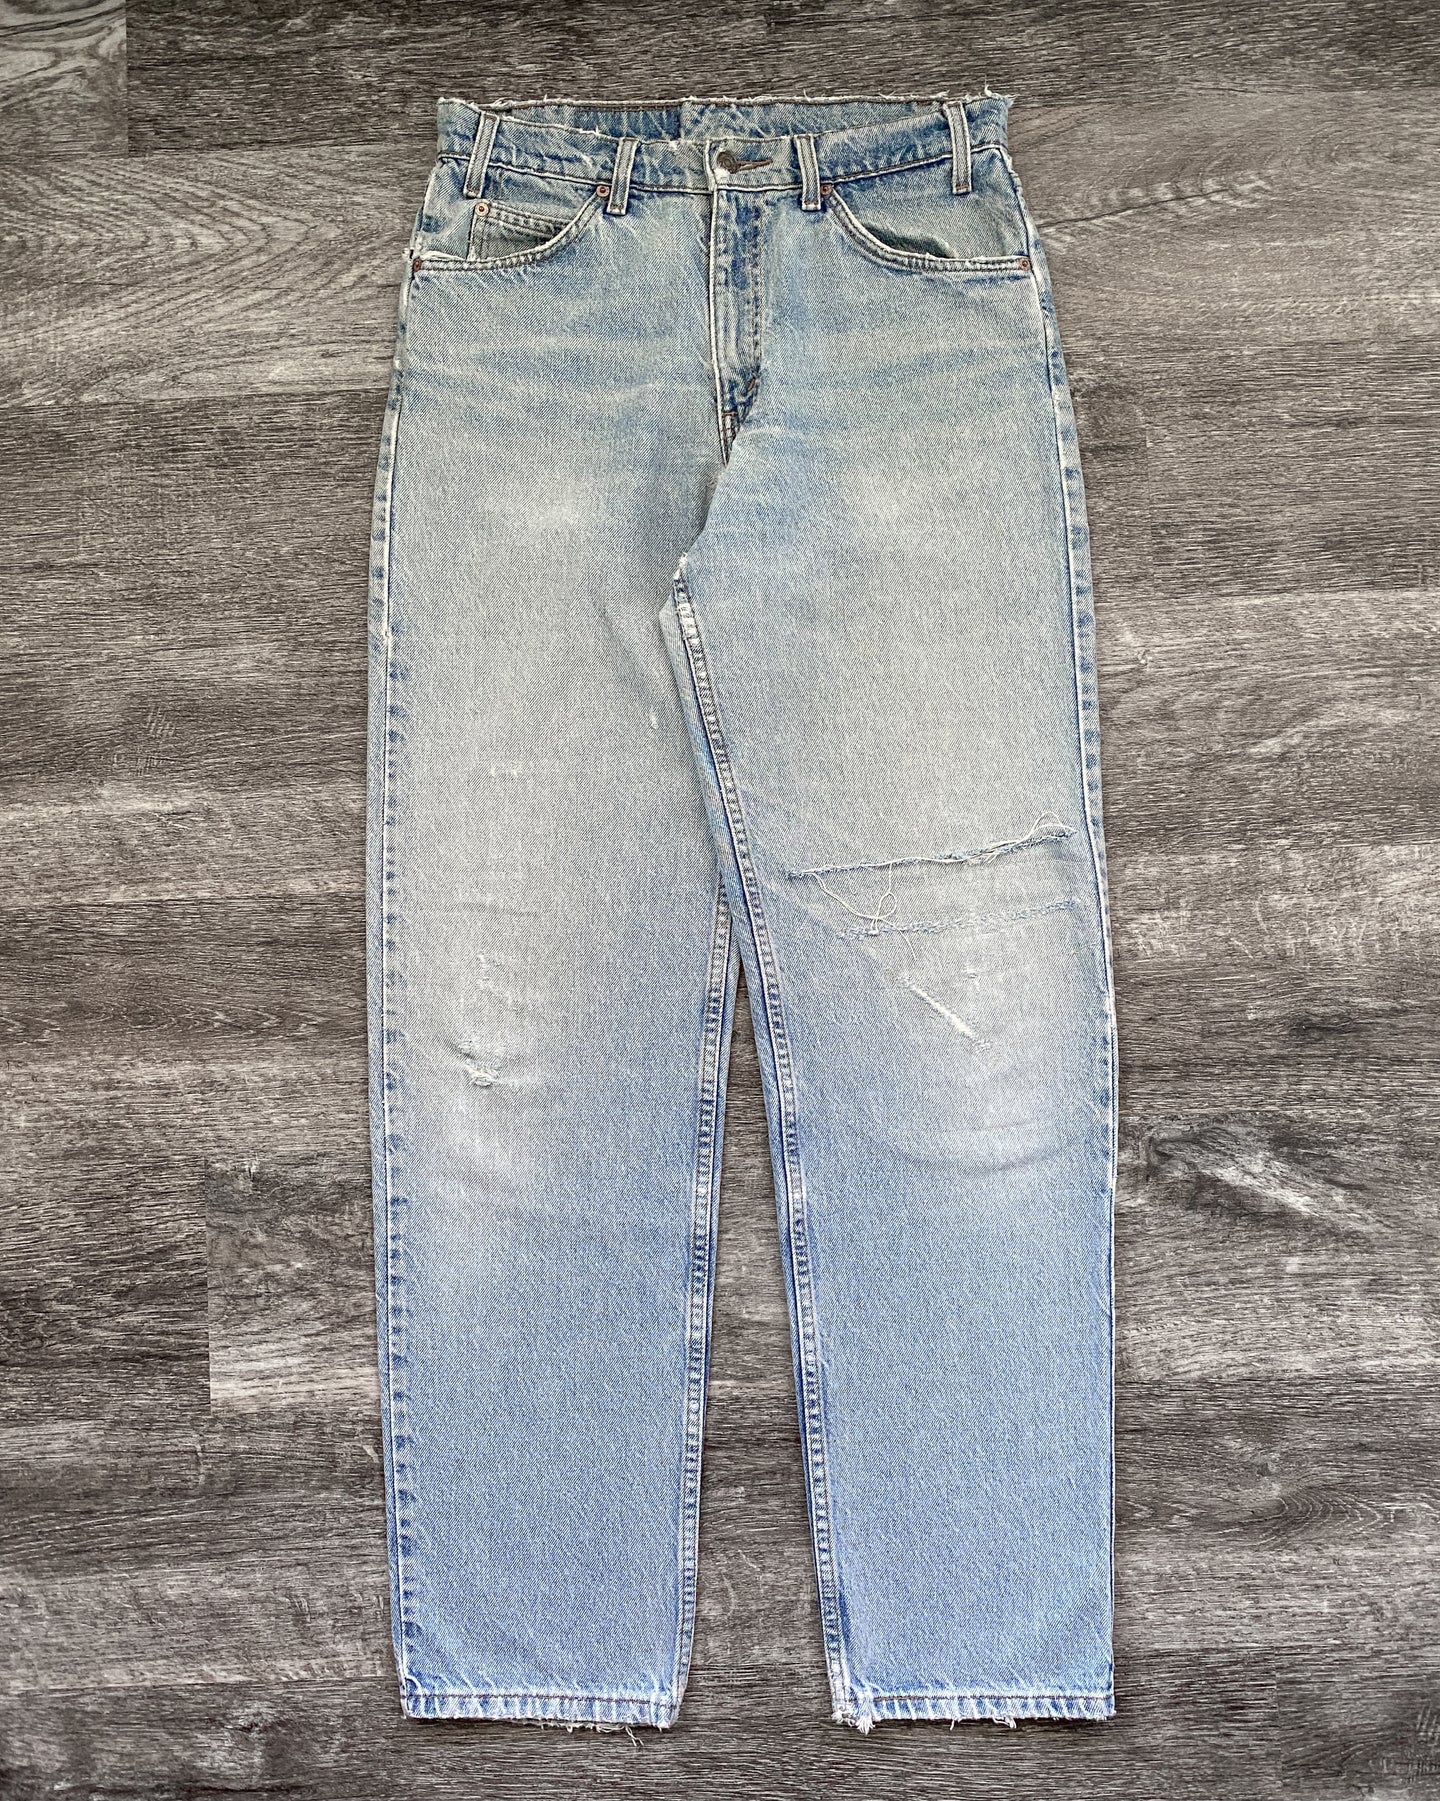 1990s Levi's Blowout and Repaired Orange Tab 550 - Size 32 x 33